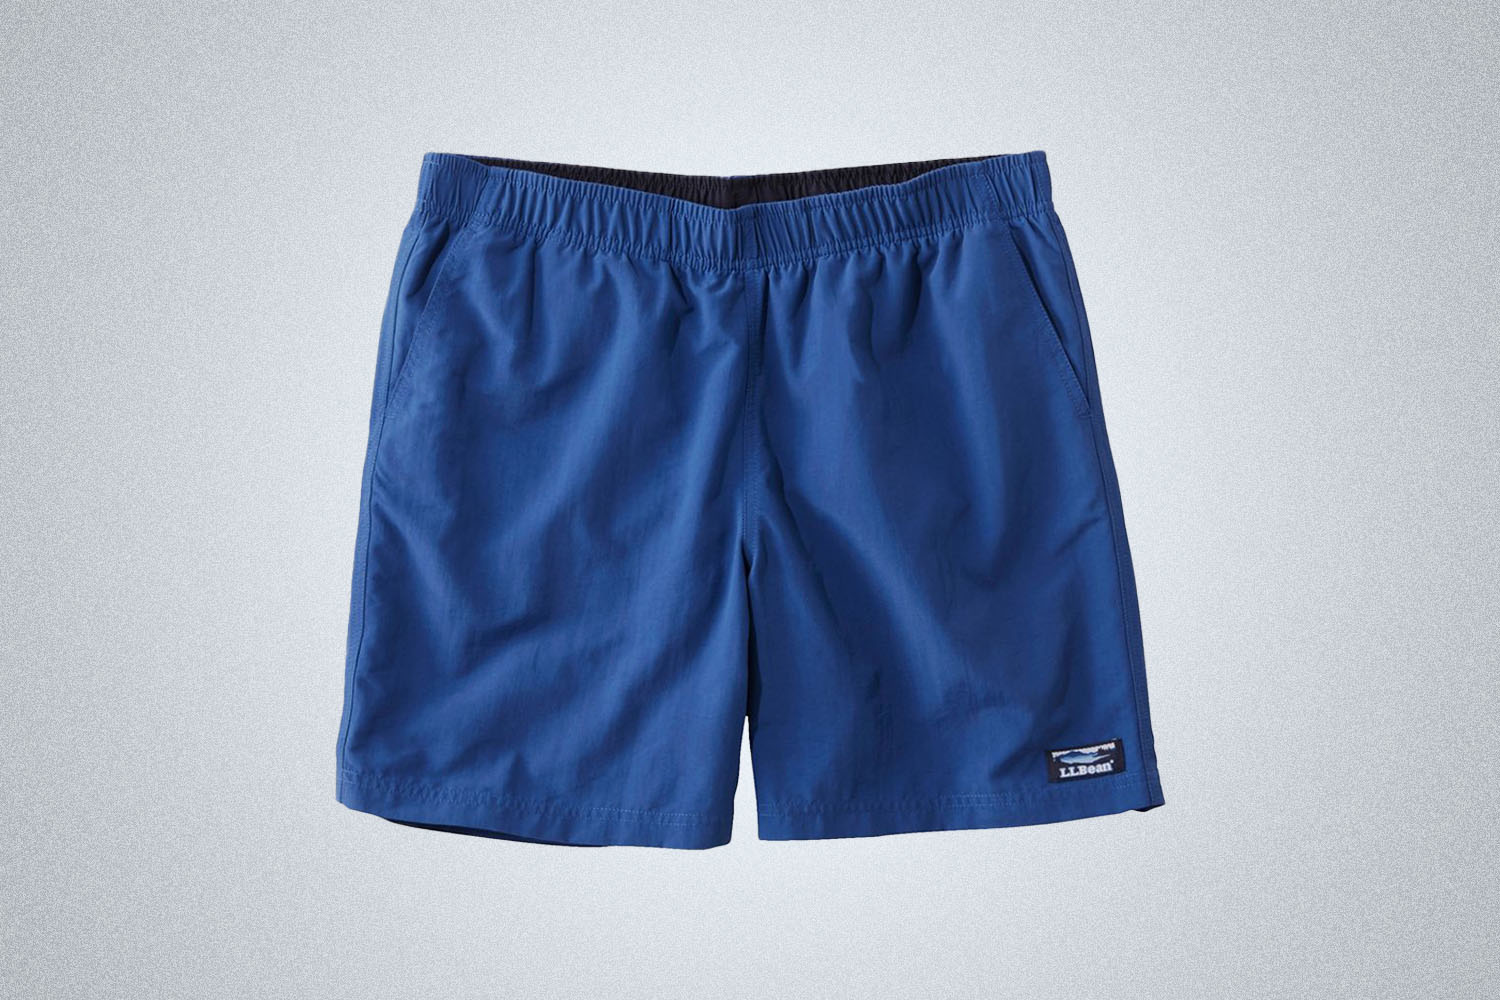 a pair of nylon shorts on a grey background 